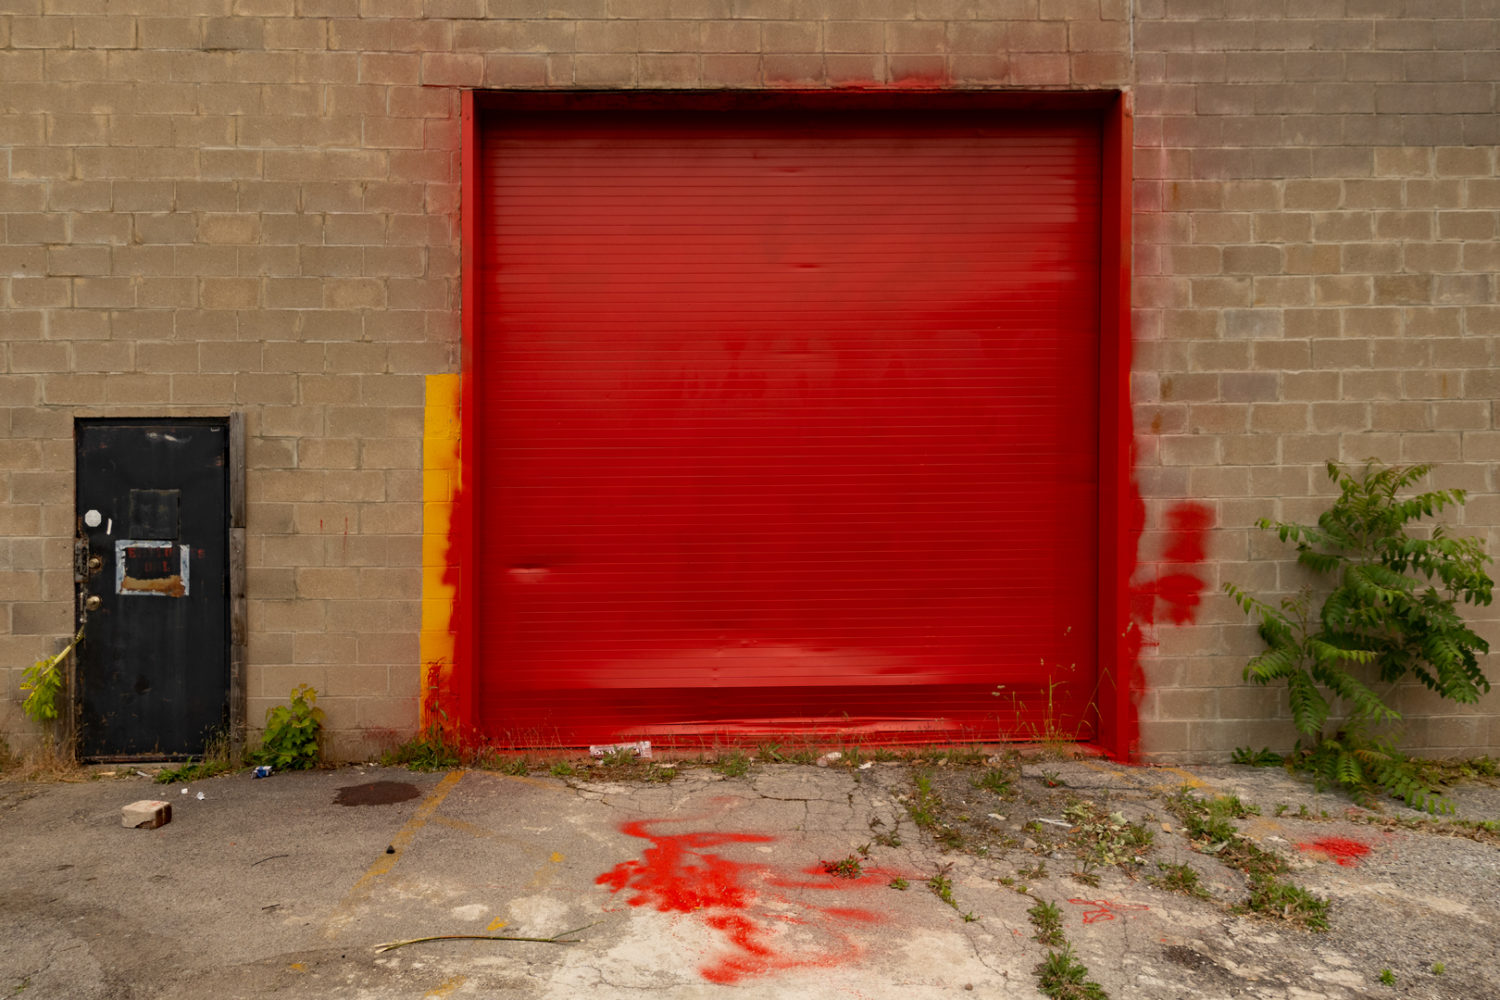 "Warehouse, Hudson Avenue" Giclée print from "Portals & Planes: Pictures by Paul Dodd"